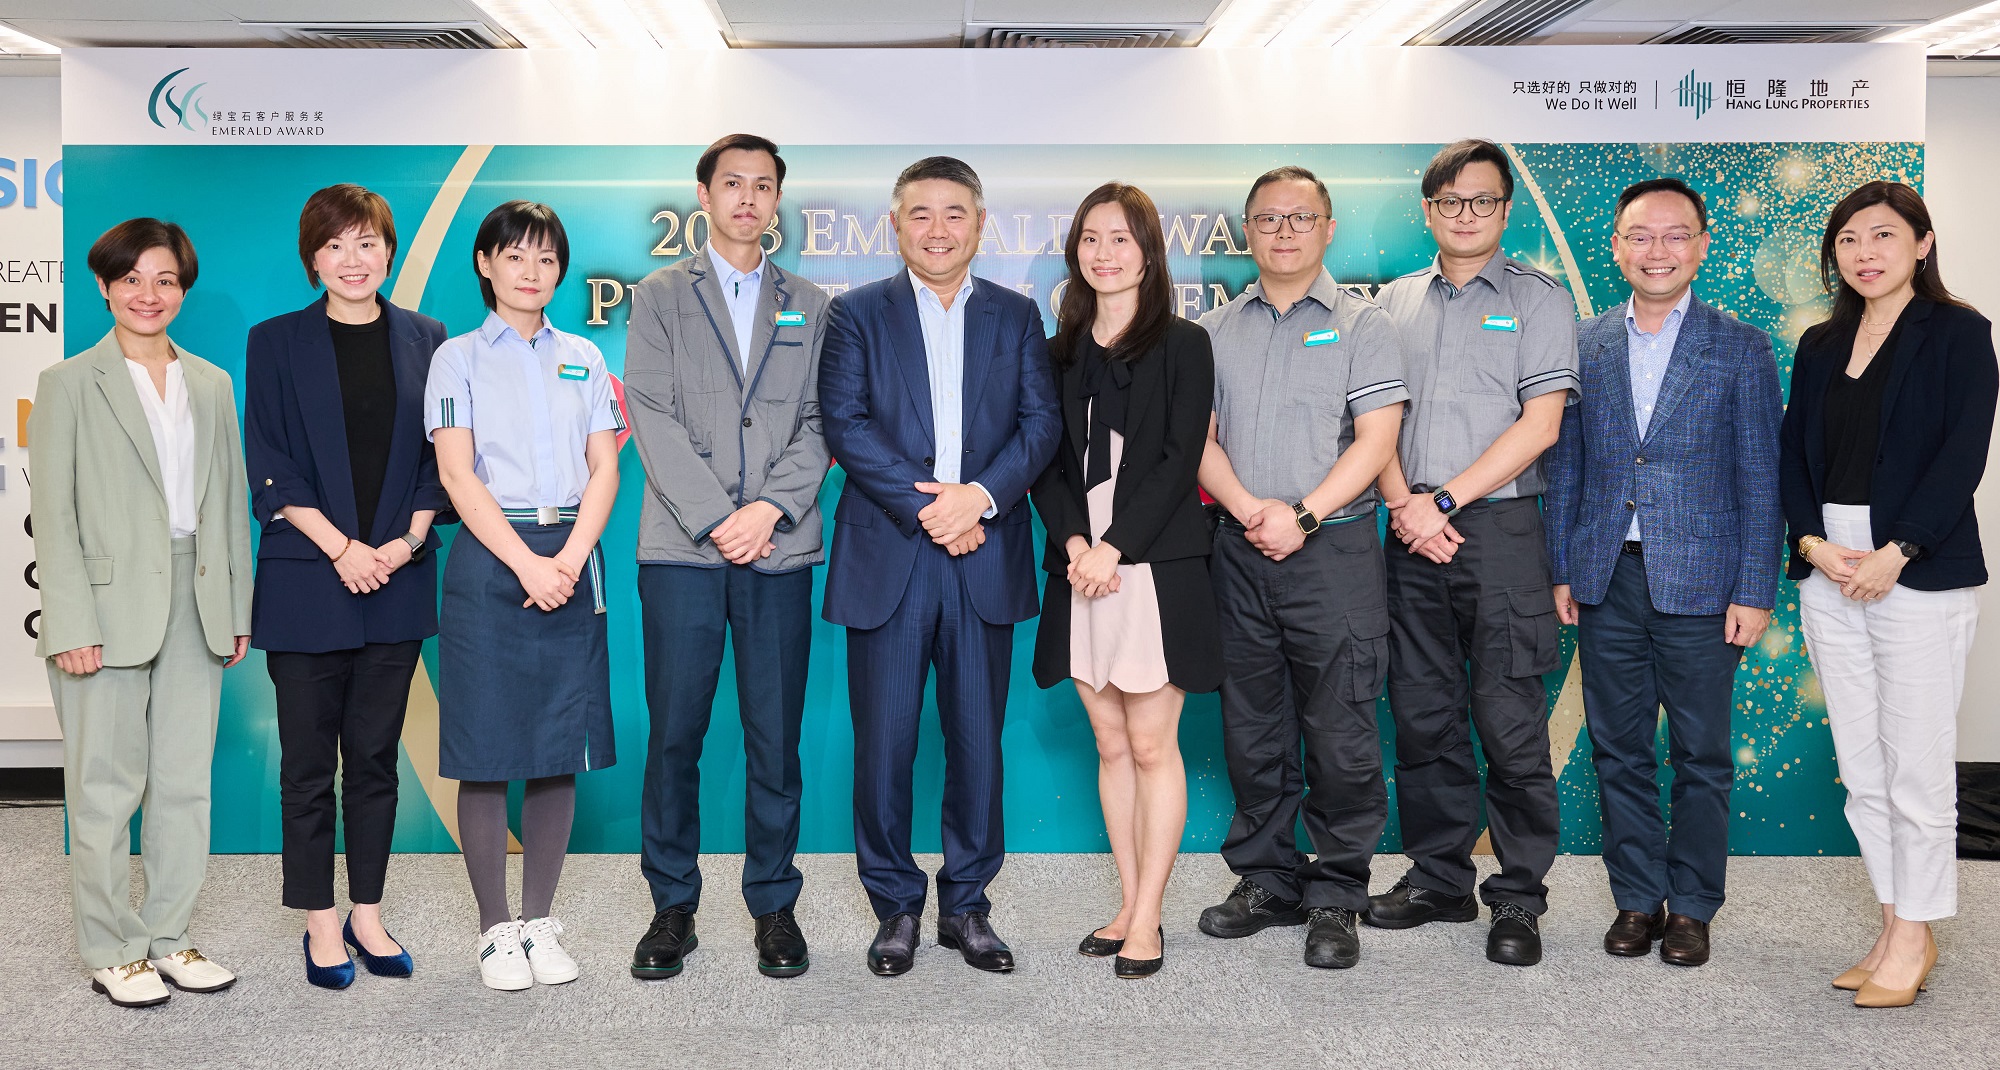 Mr. Weber Lo, Chief Executive Officer (middle); Mr. Kenneth Chiu, Chief Financial Officer (2nd from the right); Ms. Janet Poon, Director – Human Resources & Administration (2nd from the left); Ms. Helen Lau, Deputy Director (Head of Hong Kong Business Operation) (1st from the right) and Ms. Maggie Ma, General Manager – Corporate Communications (1st from the left) attend the 2023 Hang Lung Emerald Award presentation ceremony to congratulate winners for their exceptional customer services